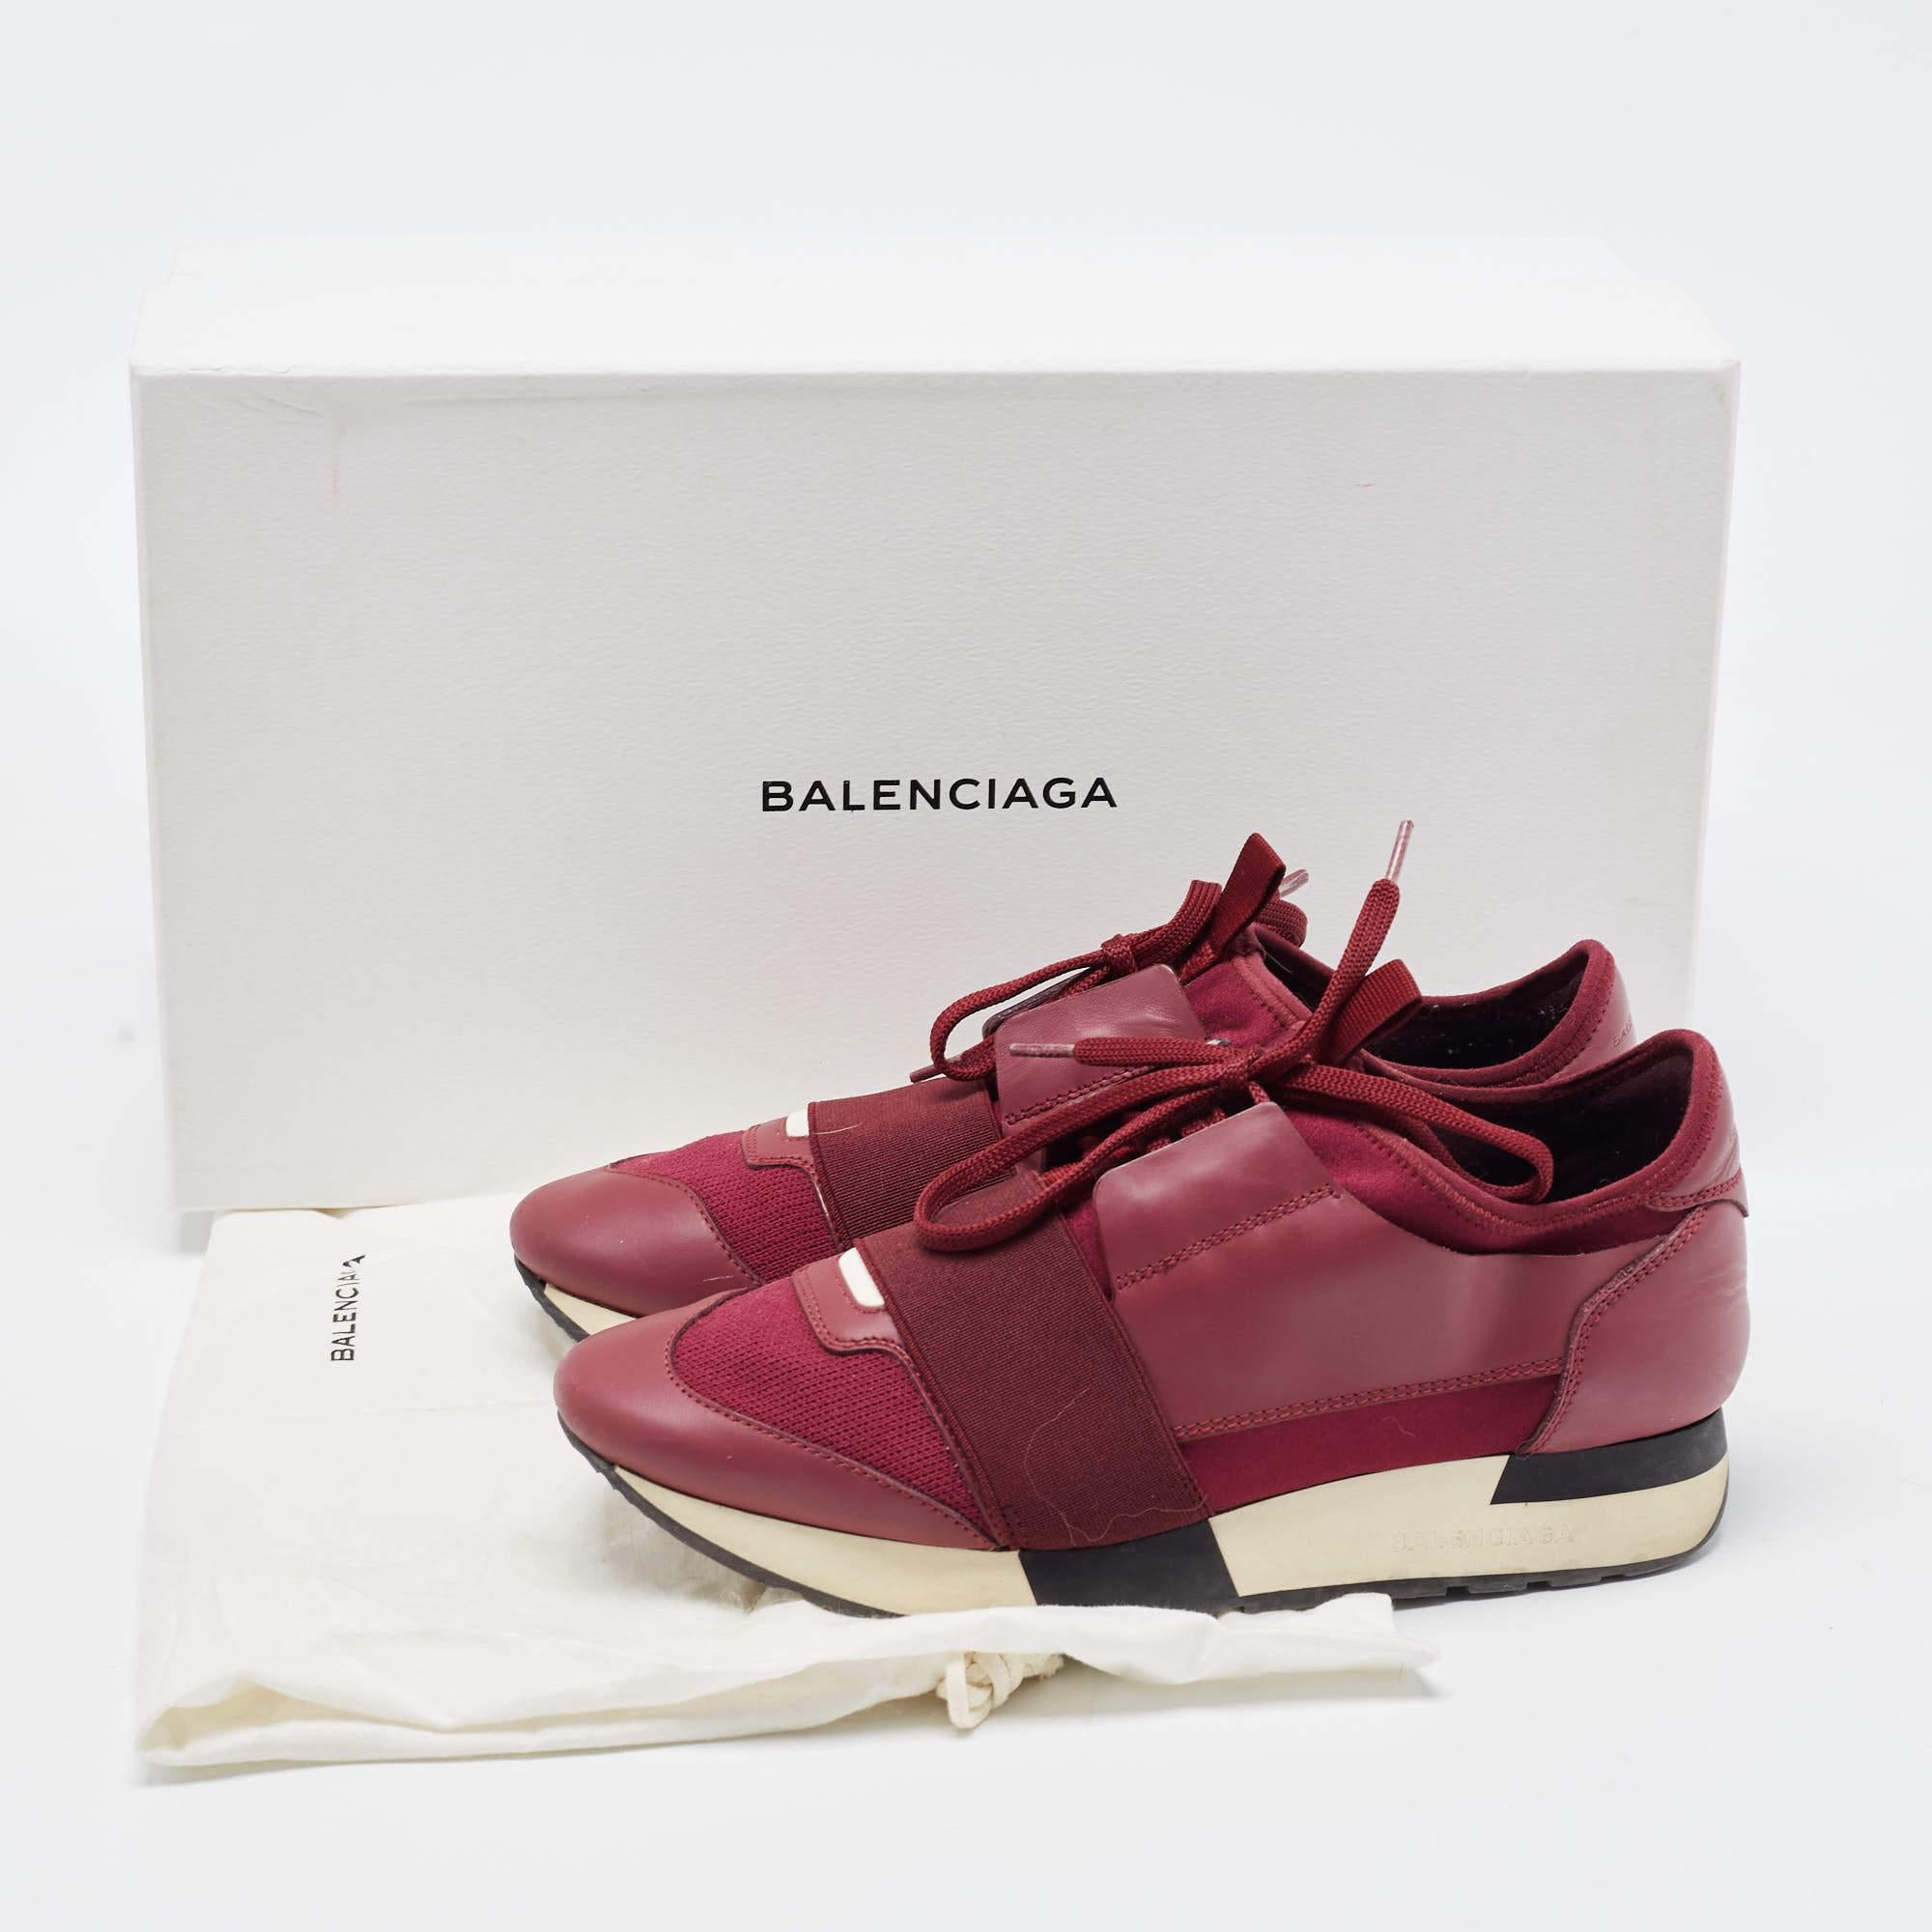 Balenciaga Burgundy Leather and Mesh Race Runner Sneakers Size 37 For Sale 5